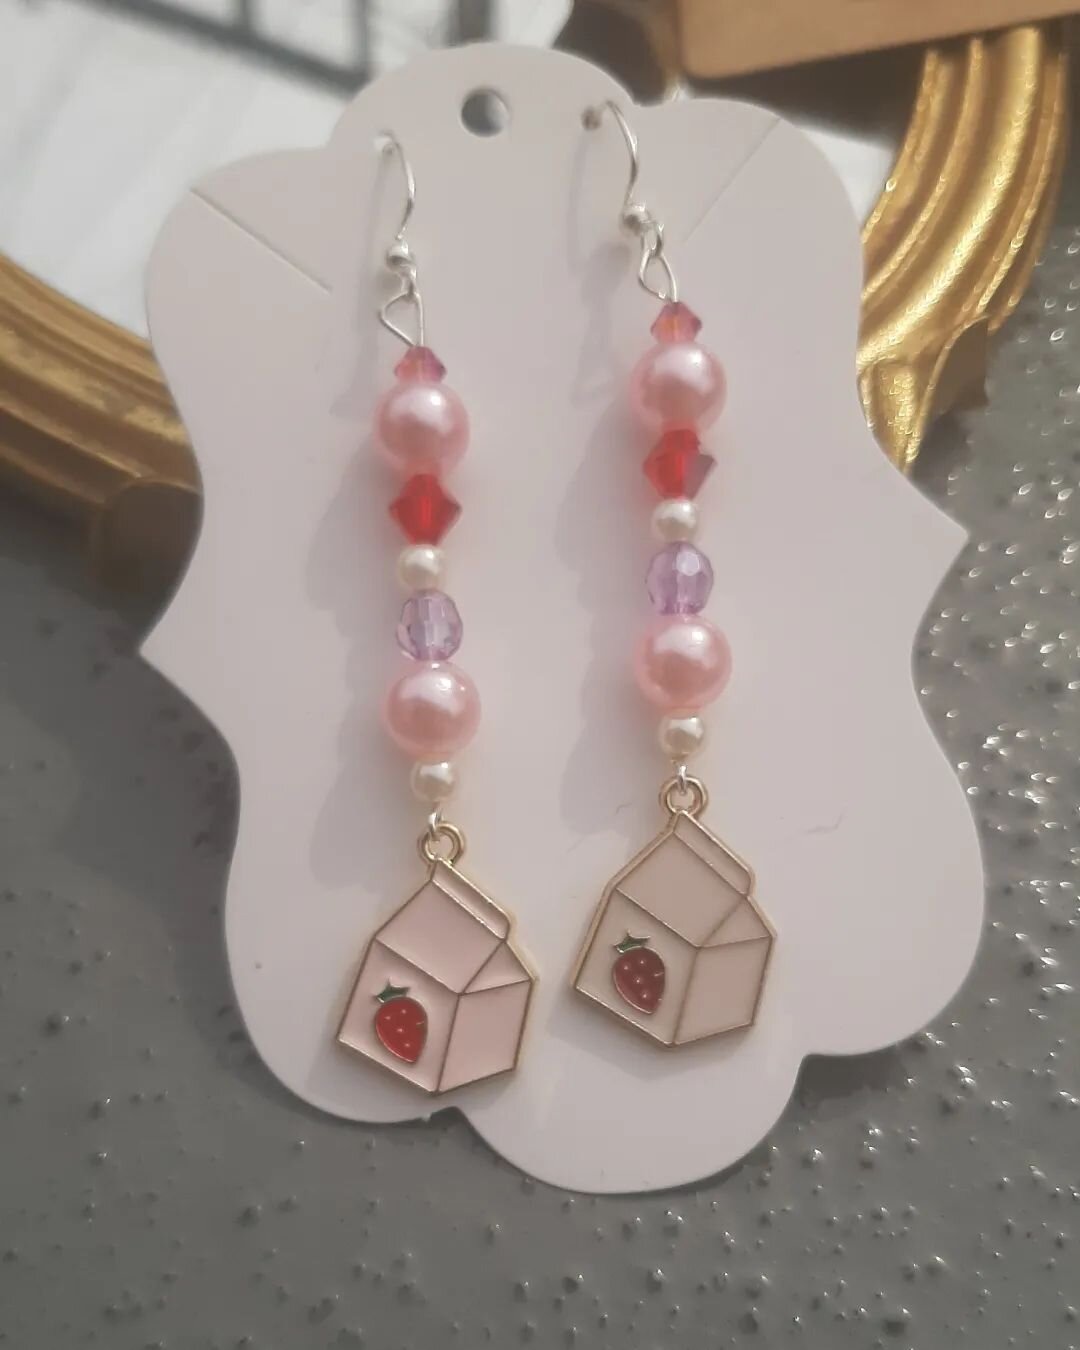 More new earrings dropping TOMORROW NIGHT for my IG live!

Join me tomorrow night at 8pmEST to grab some of the cuties. Which is your fav???

#earrings #cuteaf #cuteaesthetic #cottagecore #cottagecoreaesthetic #rainbowaesthetic #catsofinstagram #pink